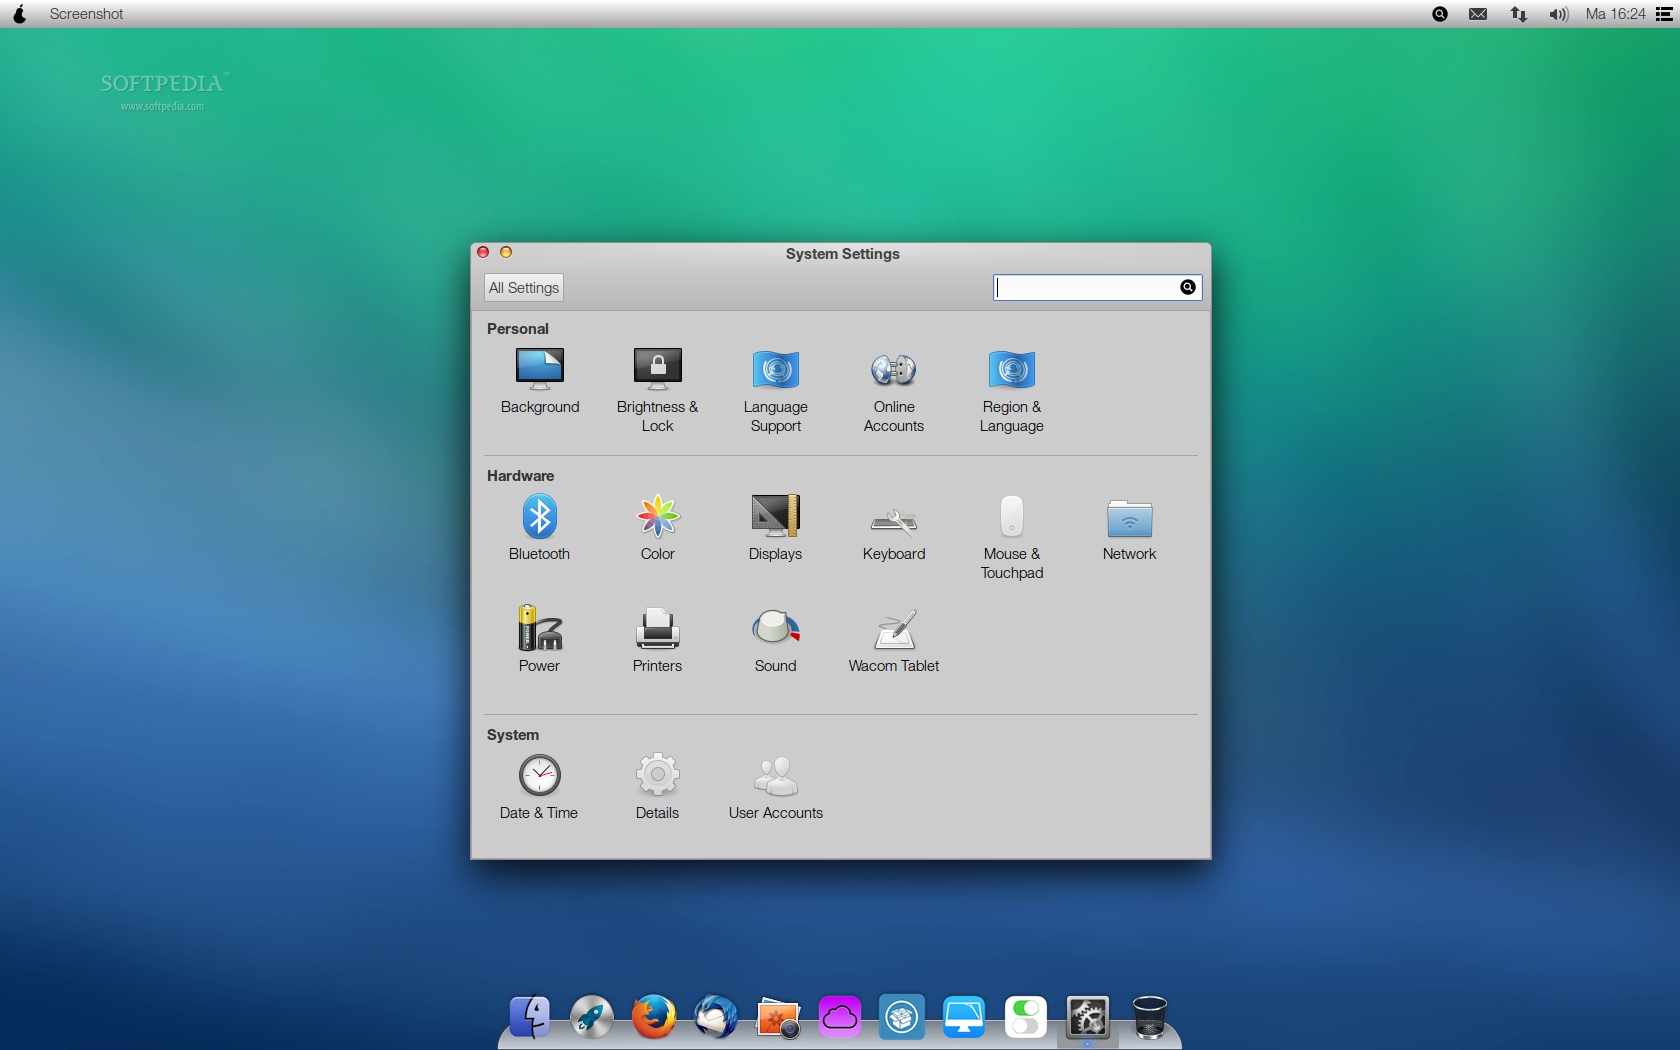 oracle virtualbox images for mac